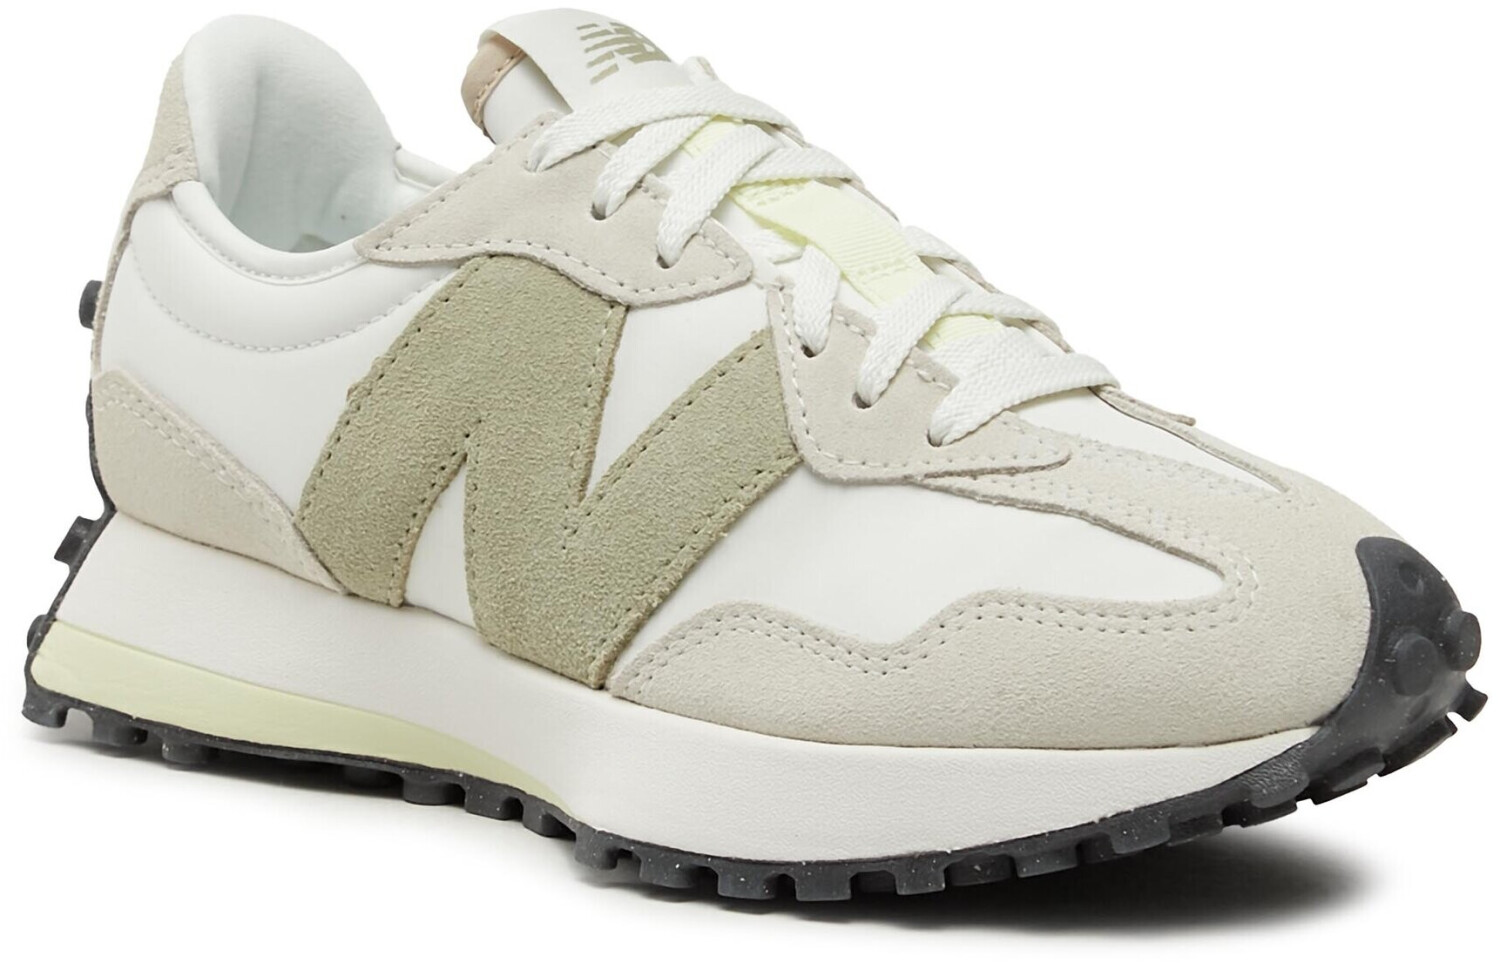 Buy New Balance 327 Women turtledove/fatigue green from £100.00 (Today) –  Best Deals on